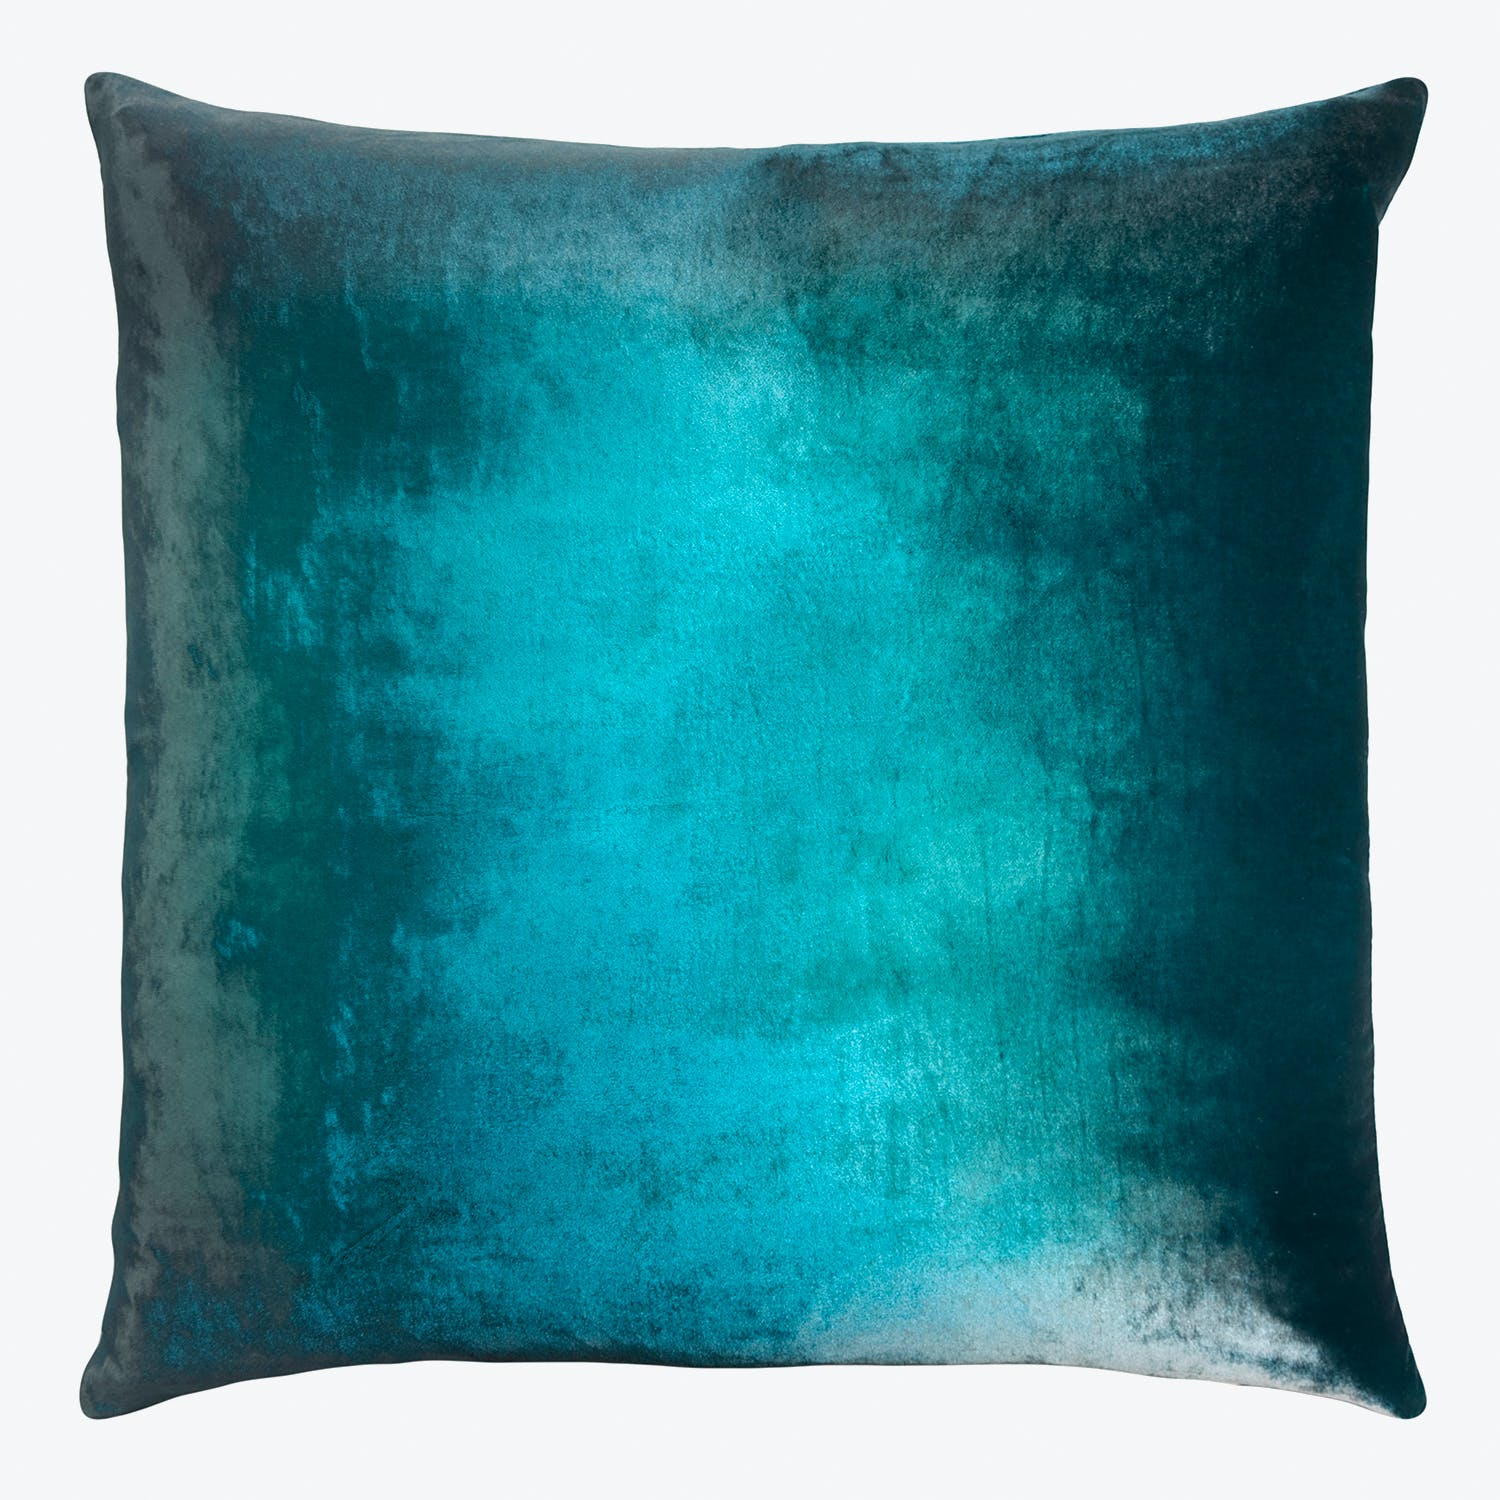 Decorative square pillow with velvety texture in rich teal ombre